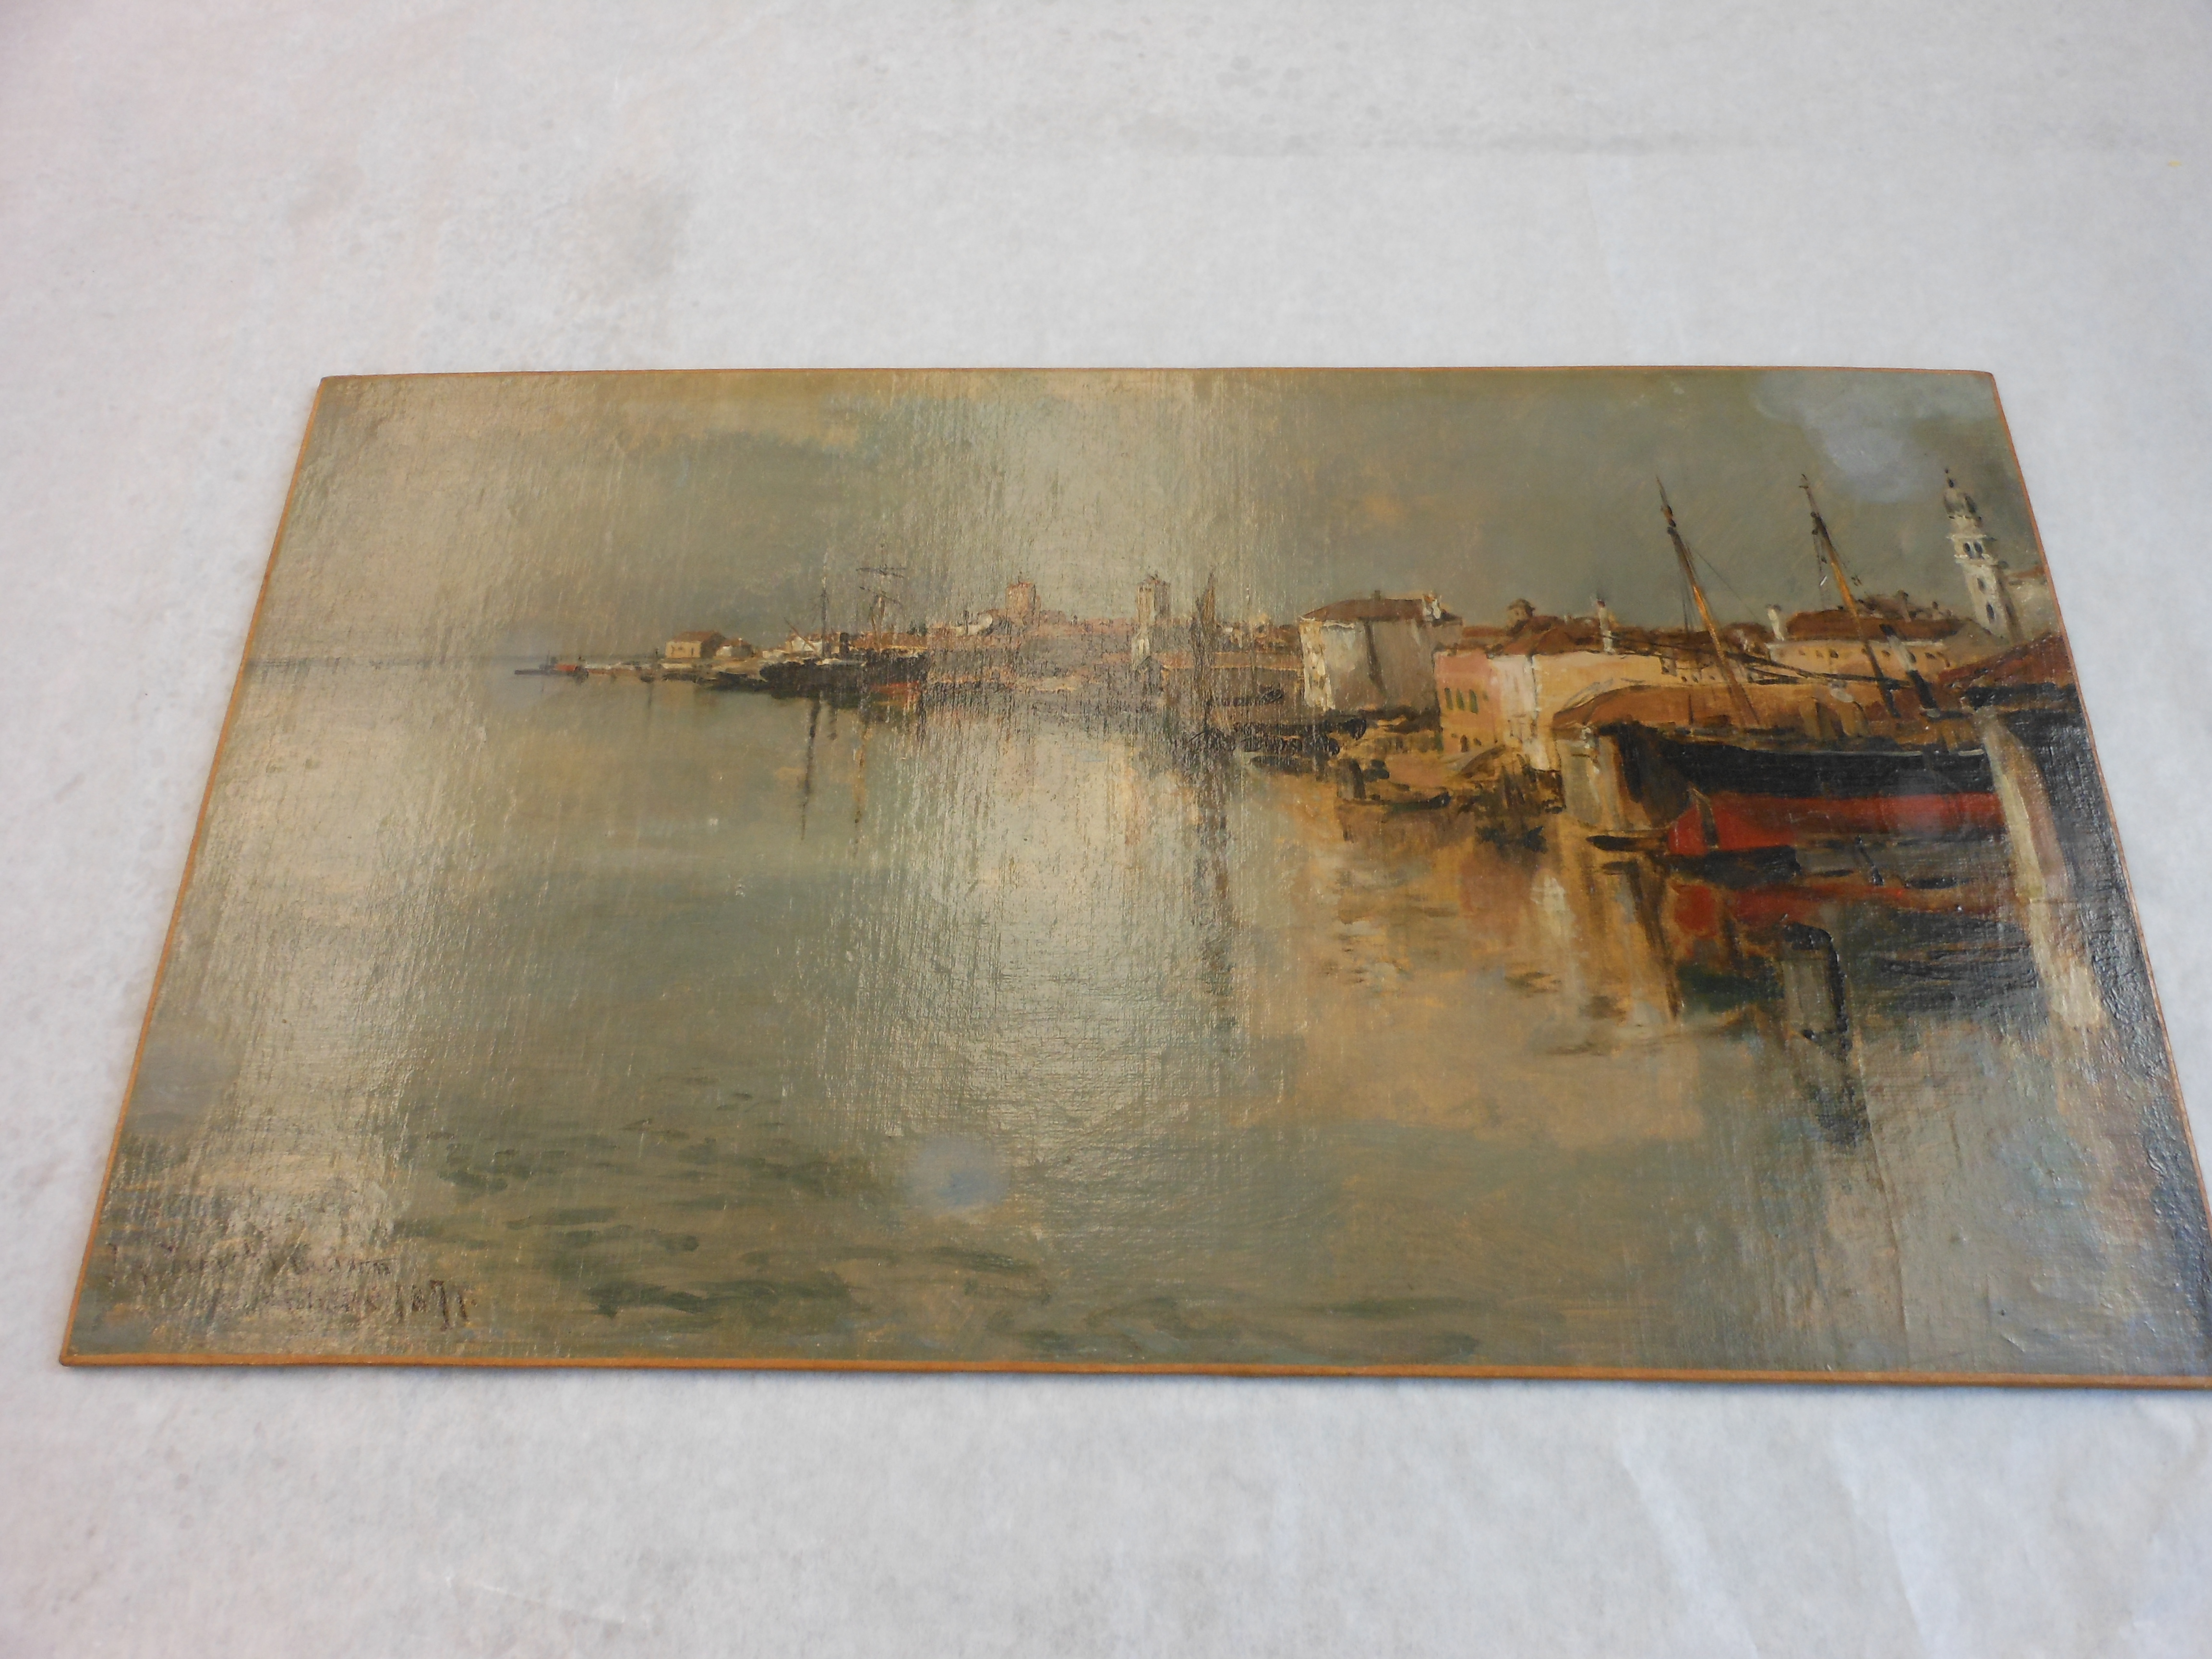 painting of Venice out of its frame